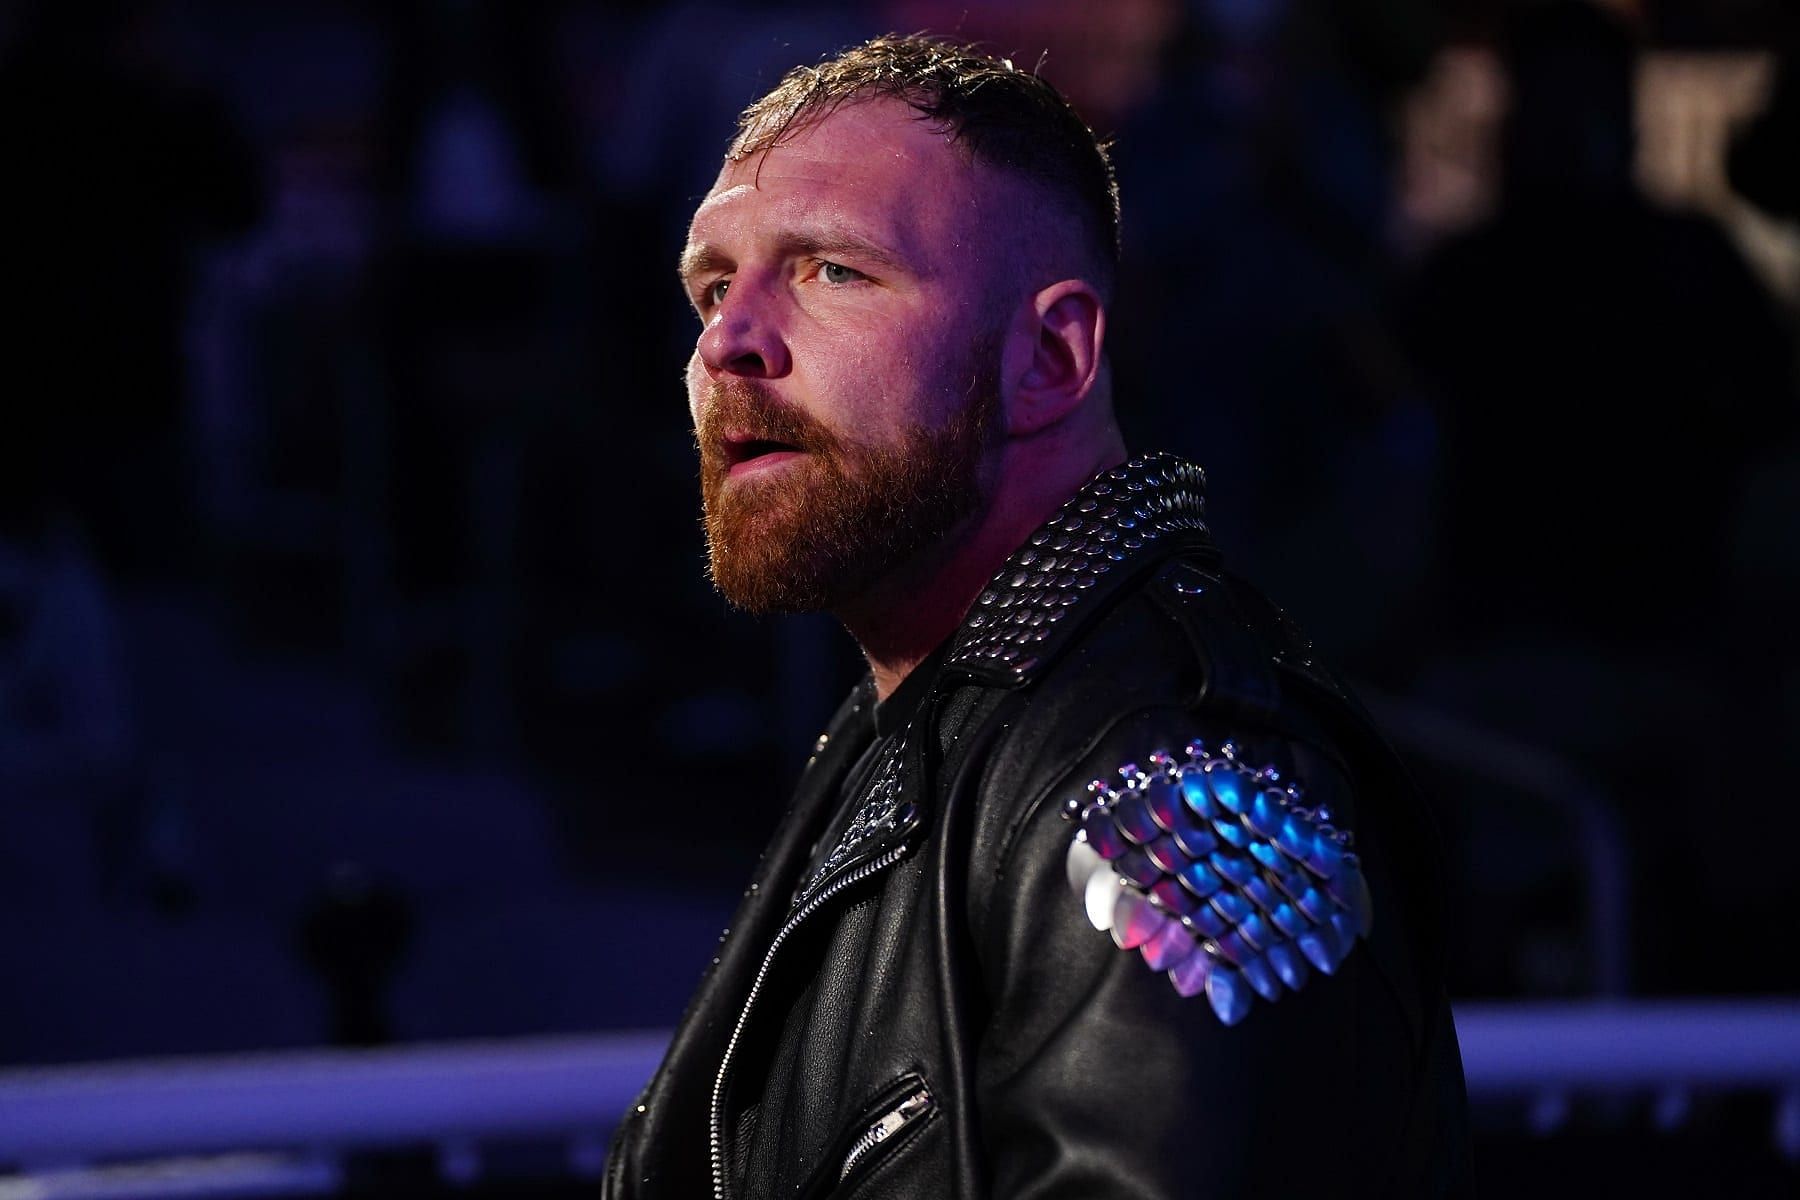 Jon Moxley was victorious at AEW Revolution 2022